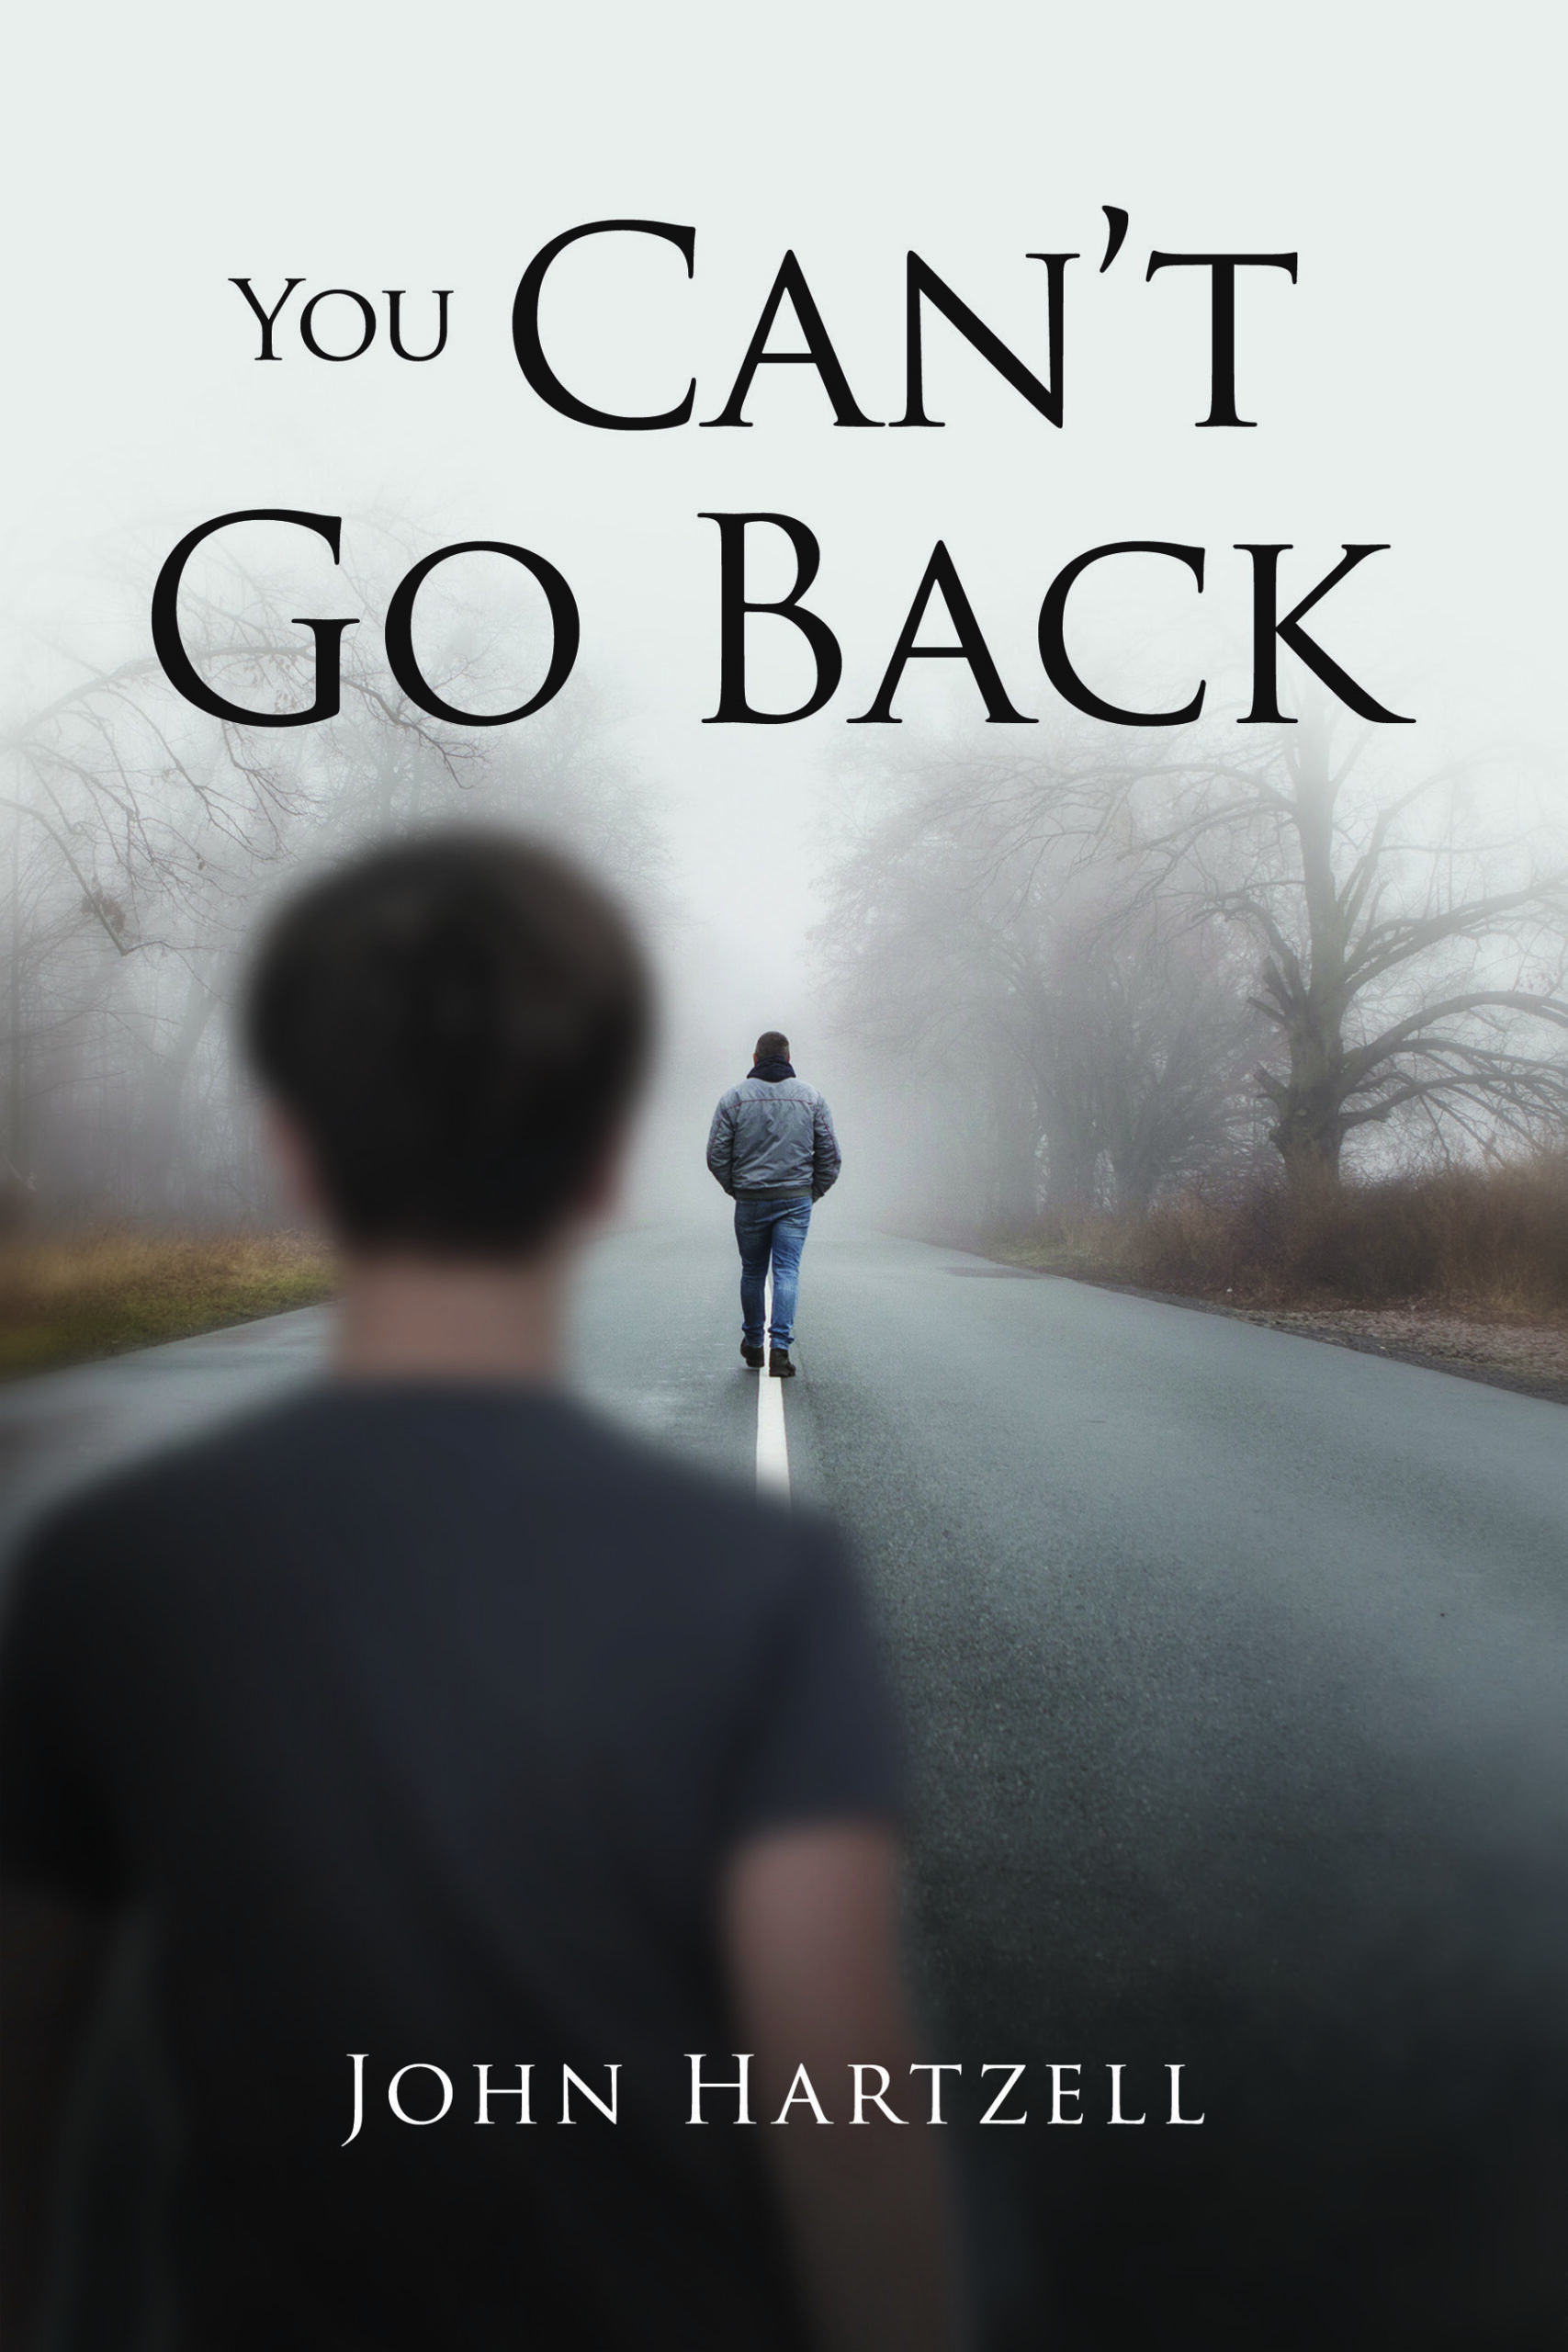 You Can’t Go Back by John Hartzell